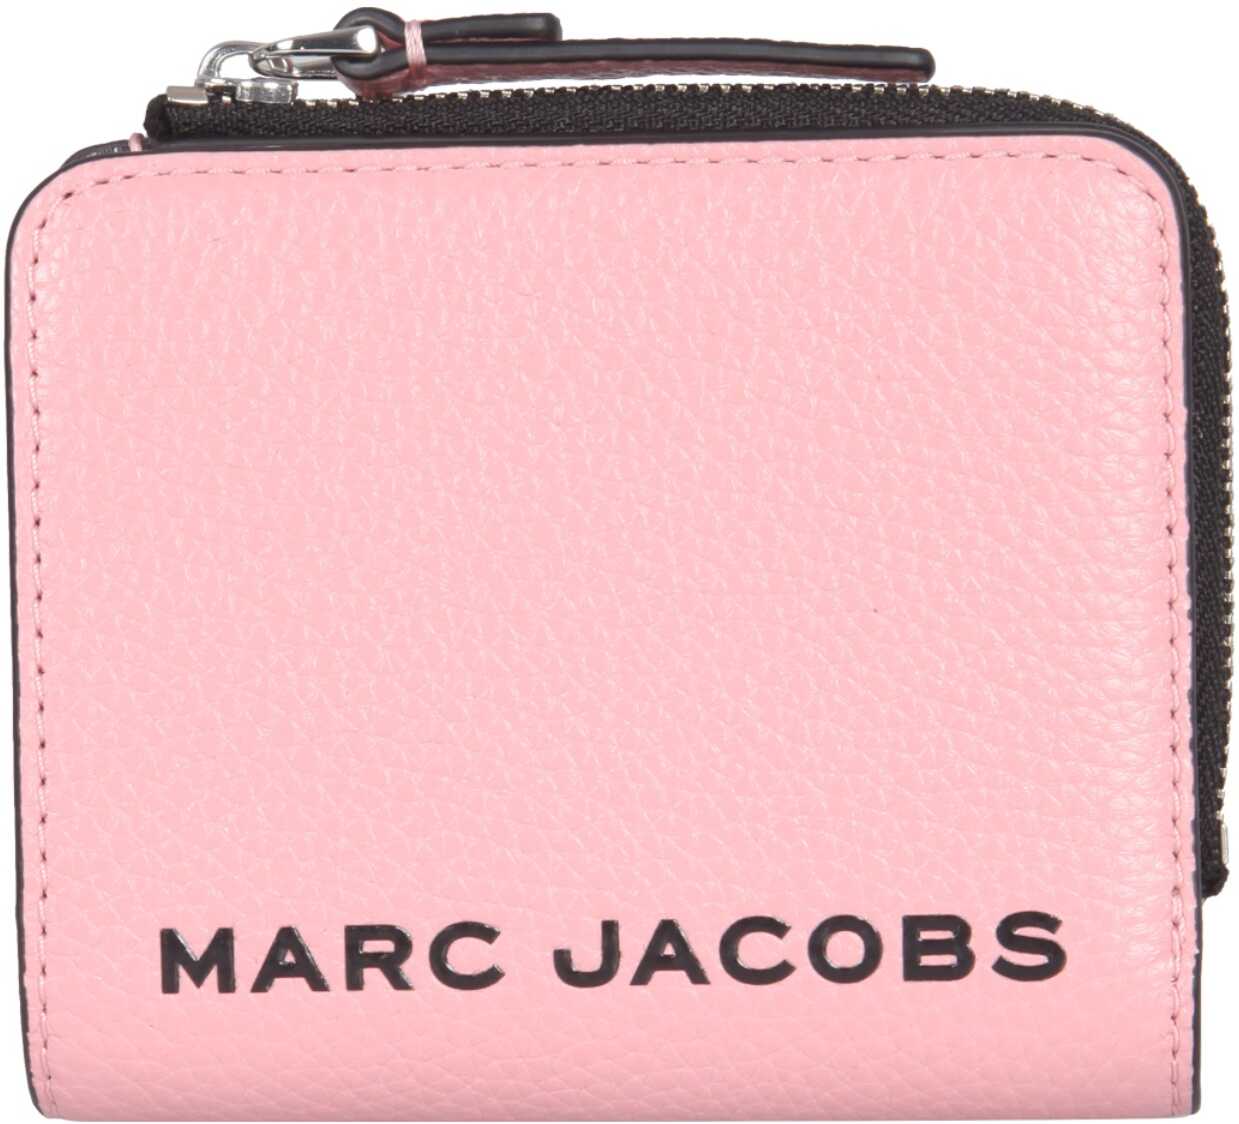 Marc Jacobs Mini The Colorblock Compact Wallet M0017140_685 PINK